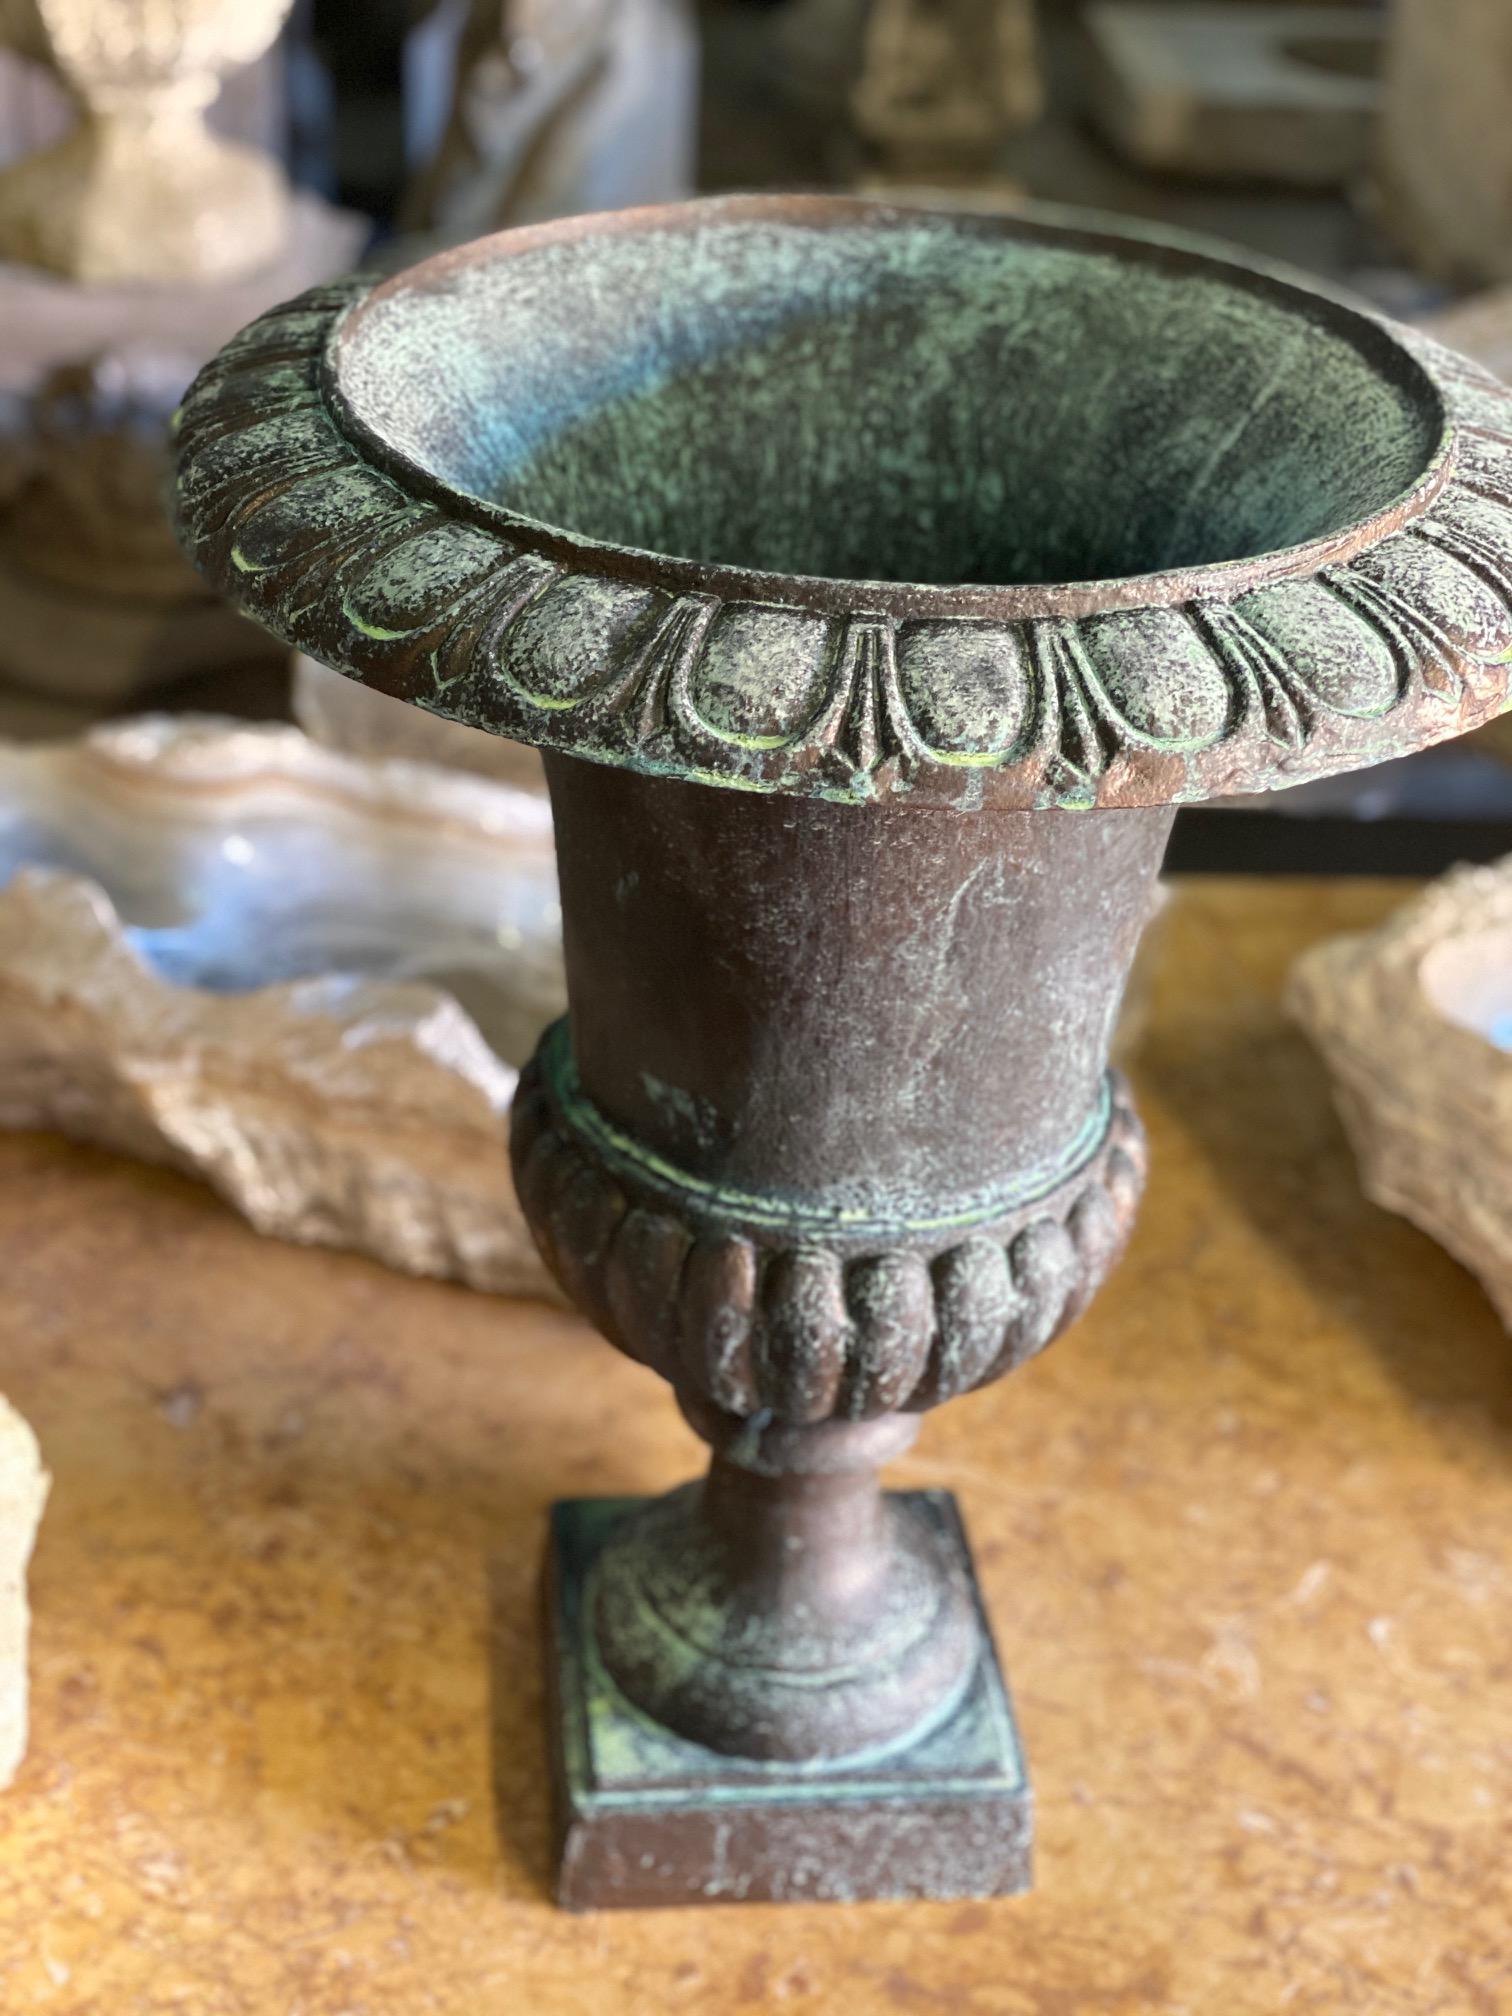 This contemporary urn features a iron / rust exterior to add charm to a garden or landscape.

Measurements: 19